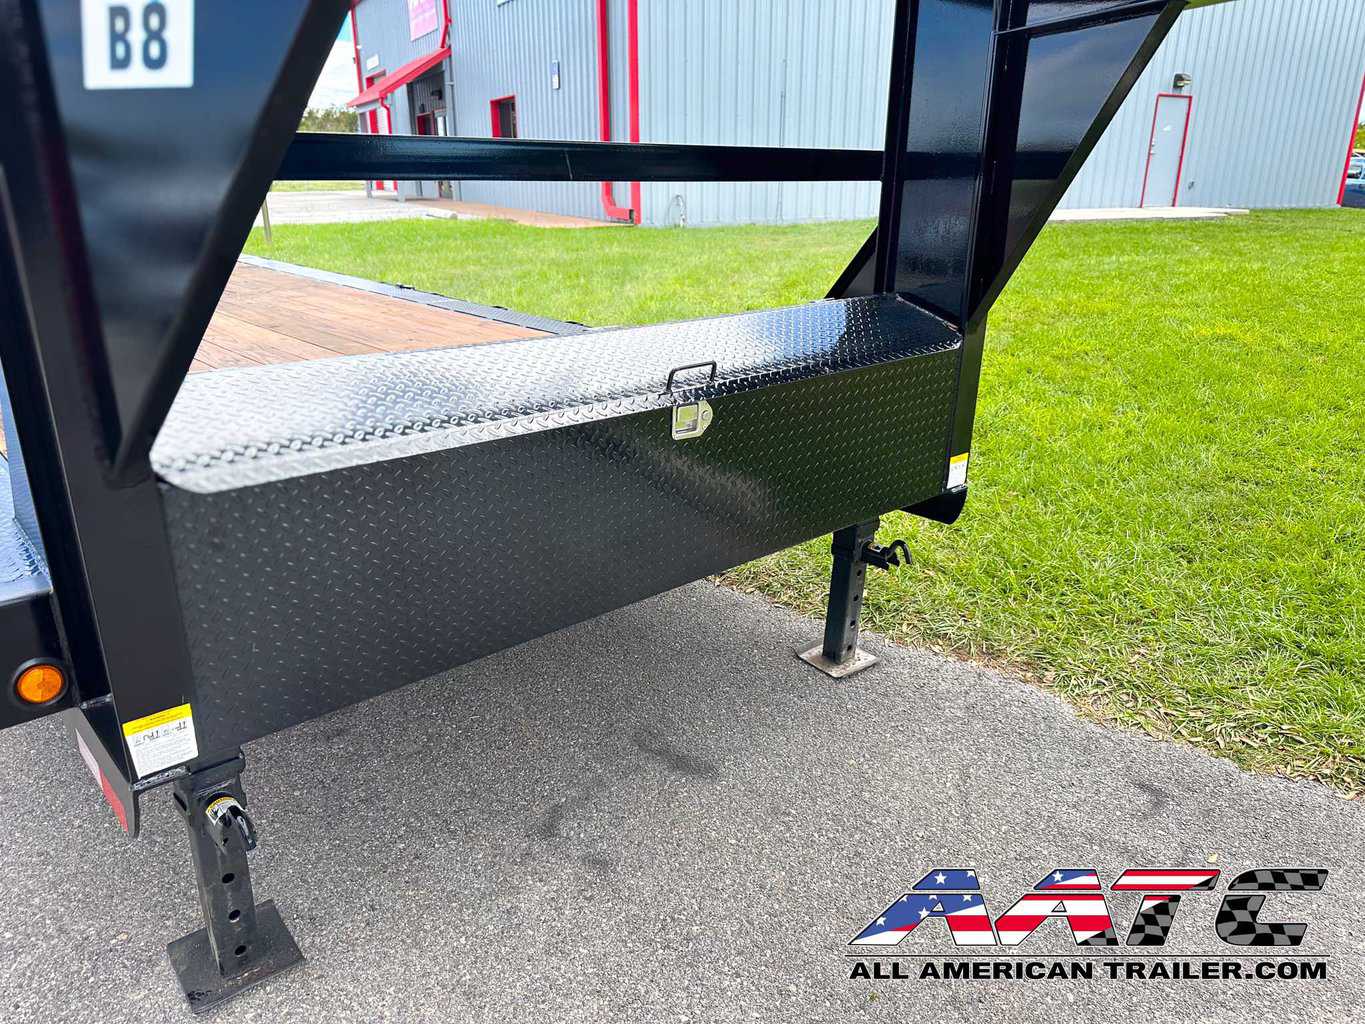 A versatile PJ 36-foot gooseneck car hauler trailer with a 15,680 GVWR, model B8-362. This PJ Trailer is designed for multi-car hauling and offers the convenience of slide-in ramps and large tires. With electric brakes, a black finish, and a gooseneck tongue type, it's a reliable choice for hauling multiple vehicles. The trailer measures 36x8.5 feet, making it ideal for transporting a variety of vehicles and equipment.